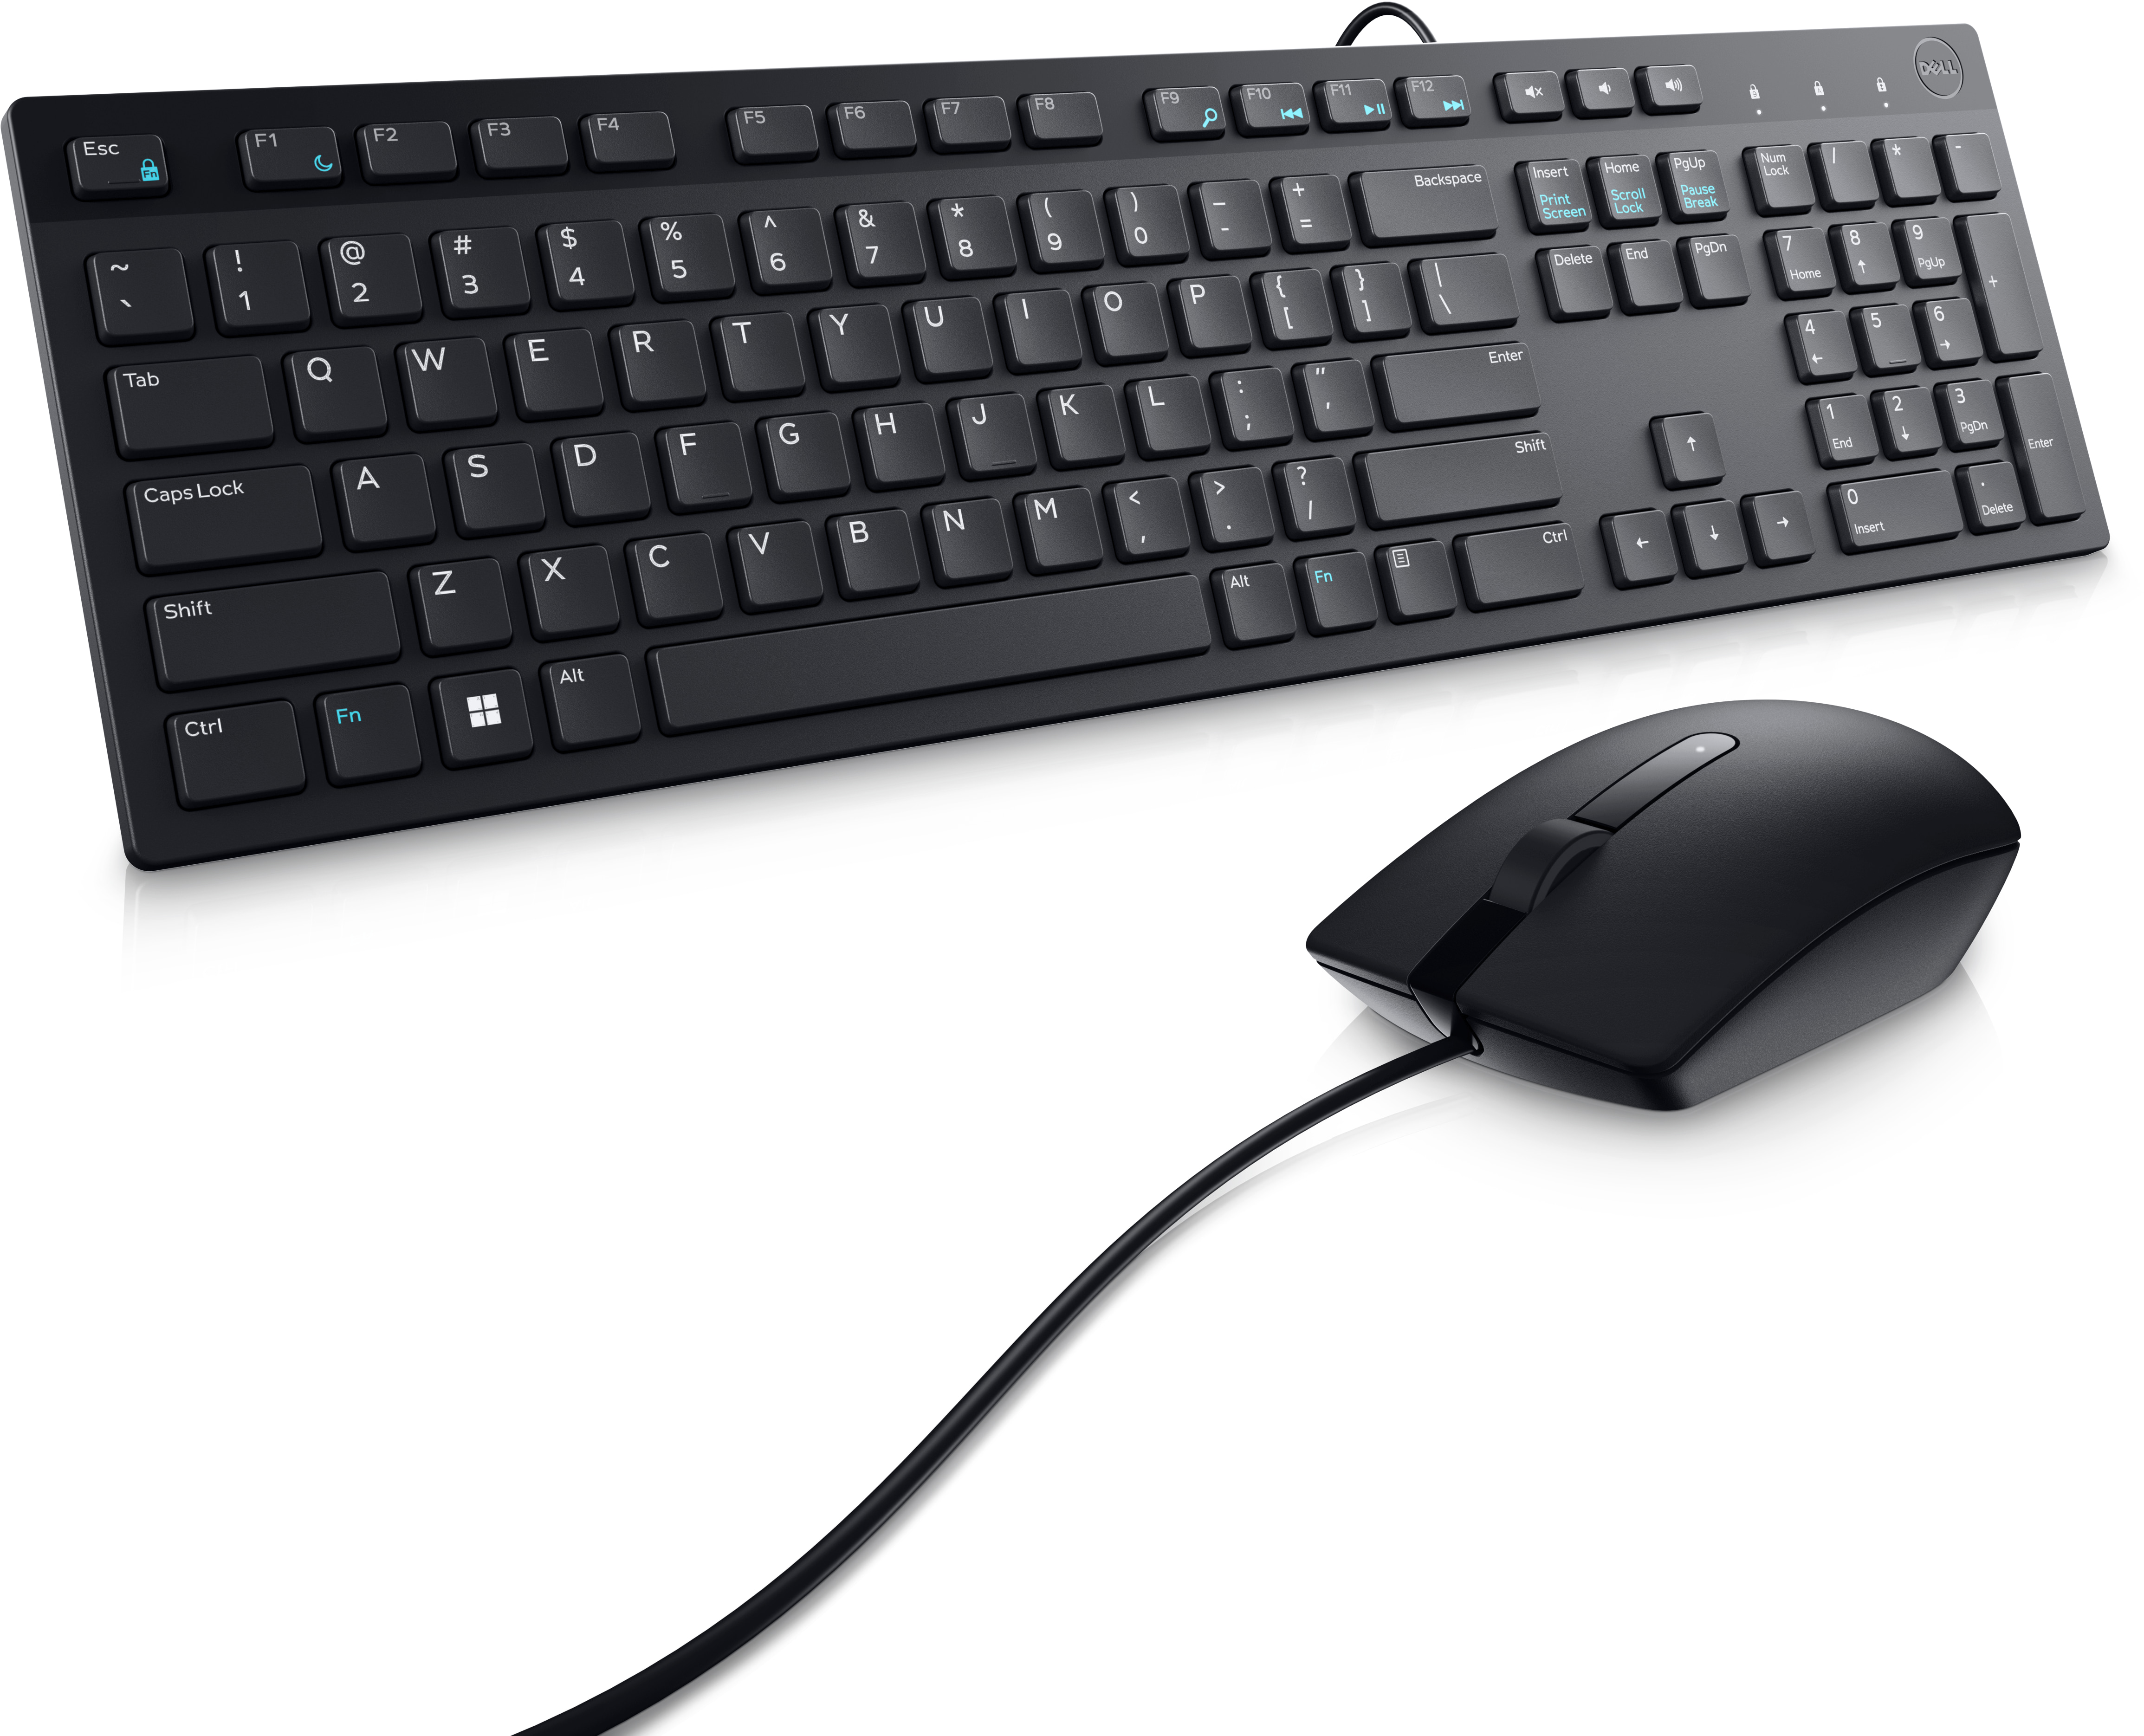 Dell Keyboard and Mouse (KM300C) : Computer Accessories | Dell USA